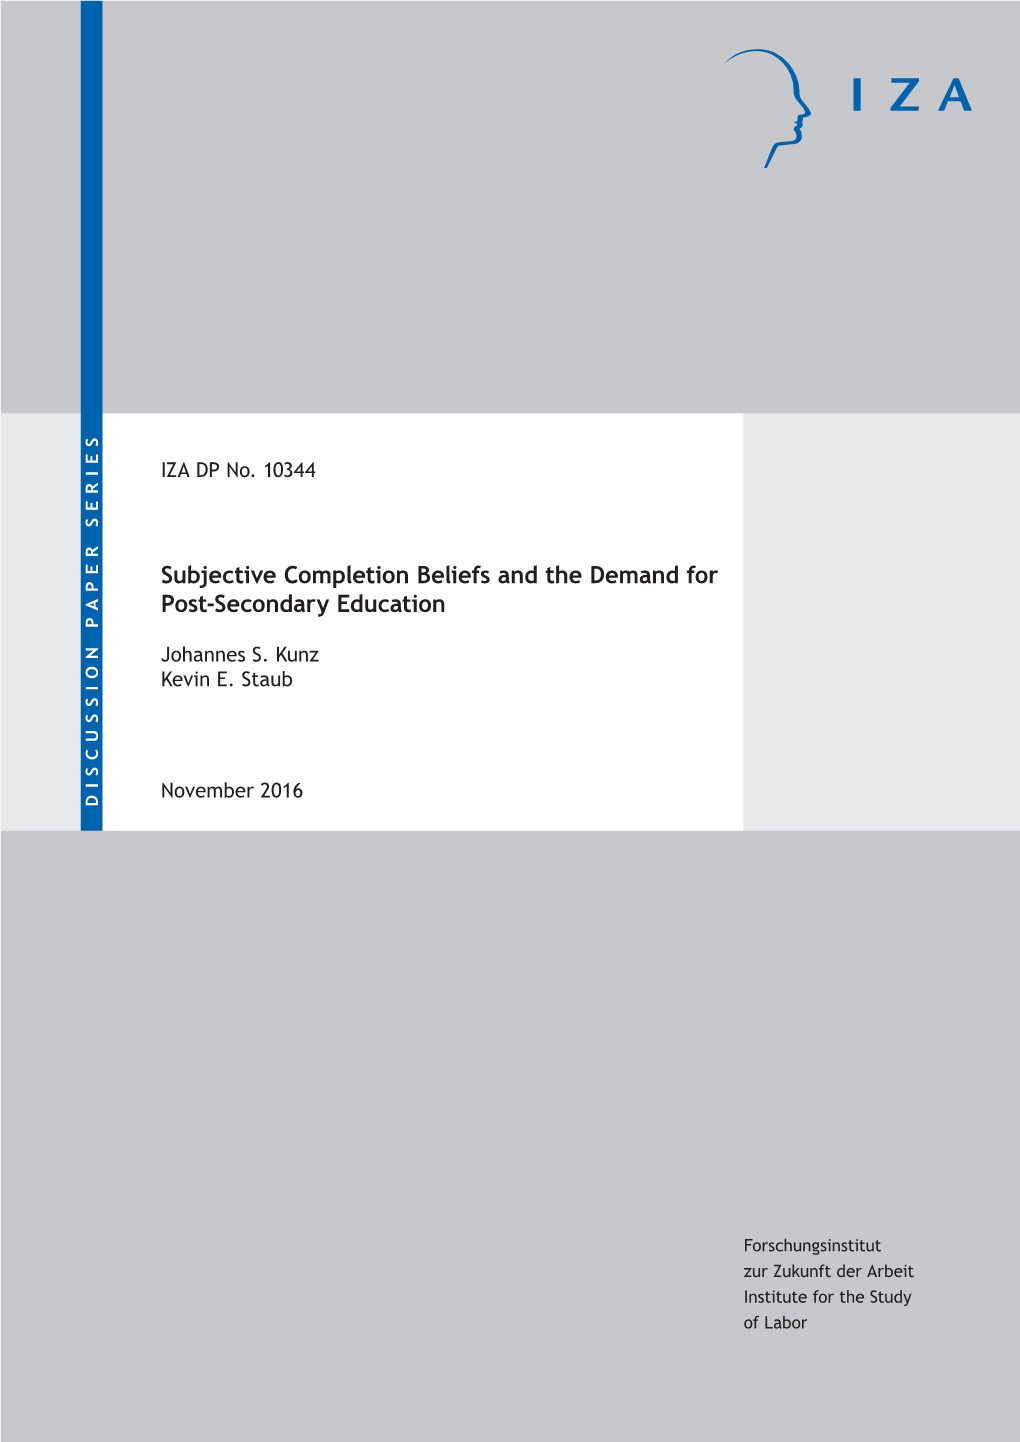 Subjective Completion Beliefs and the Demand for Post-Secondary Education